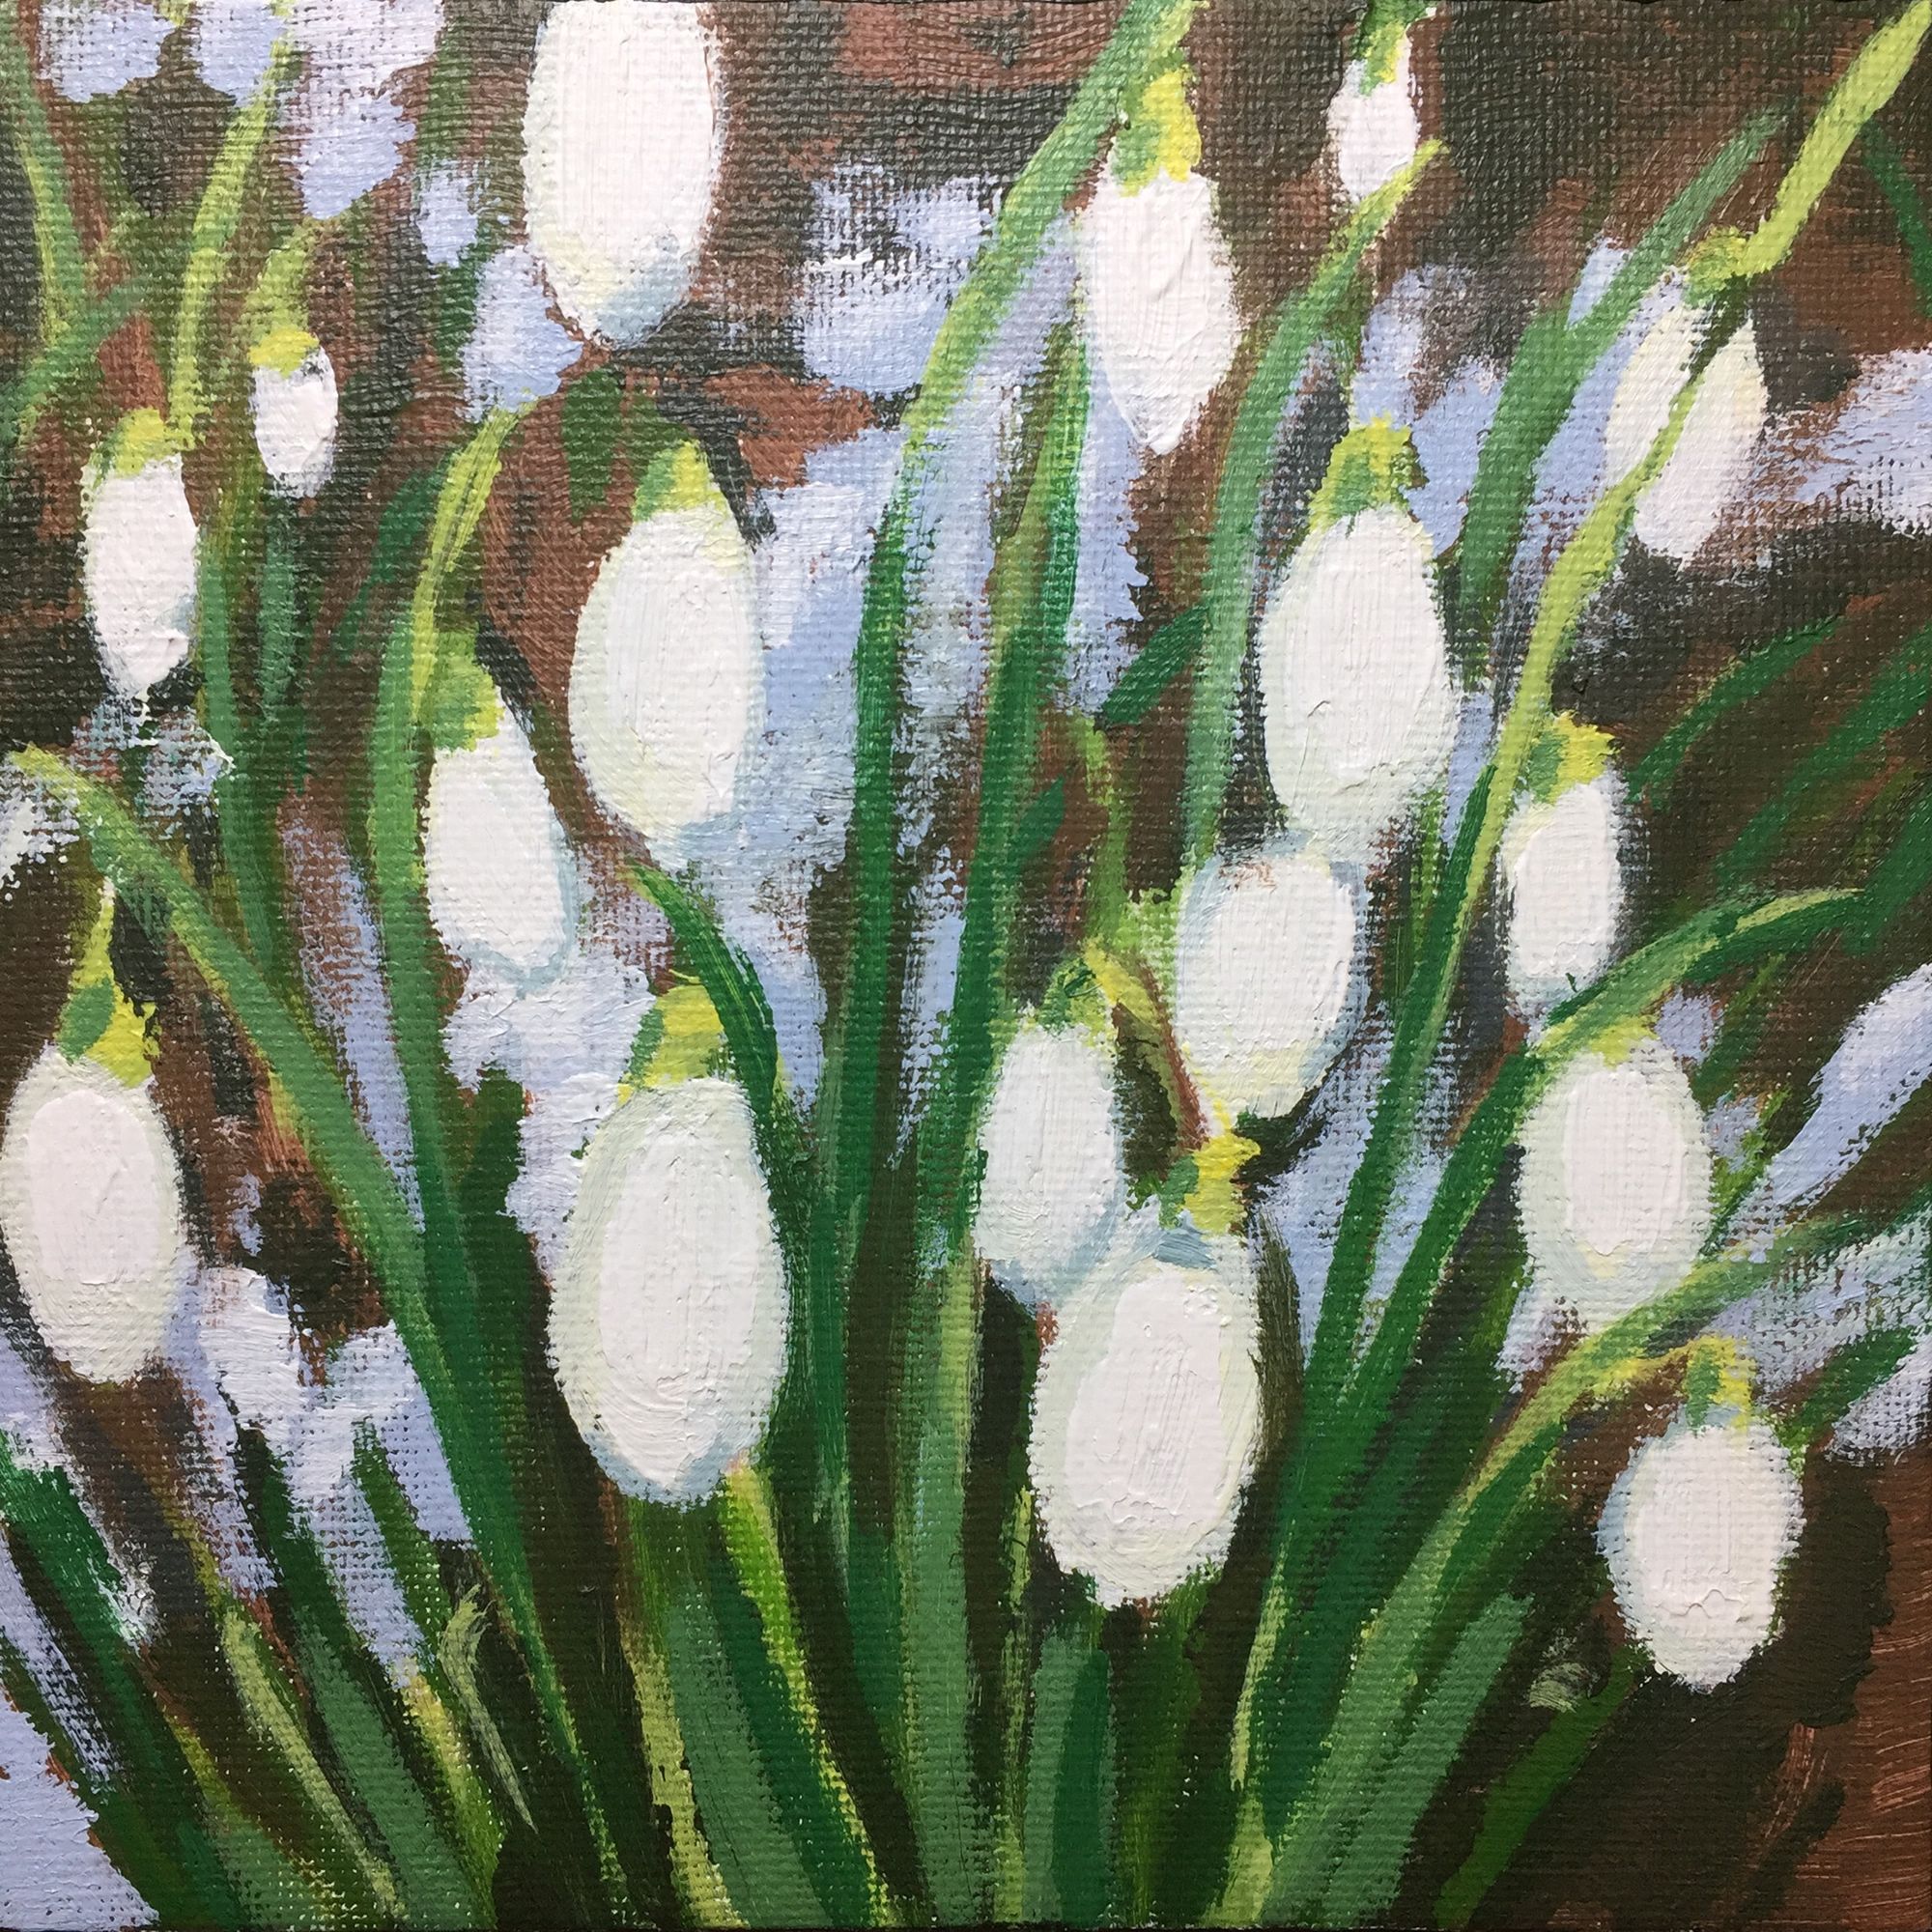 Snowdrops and Snow study 1 by Alexandra Buckle